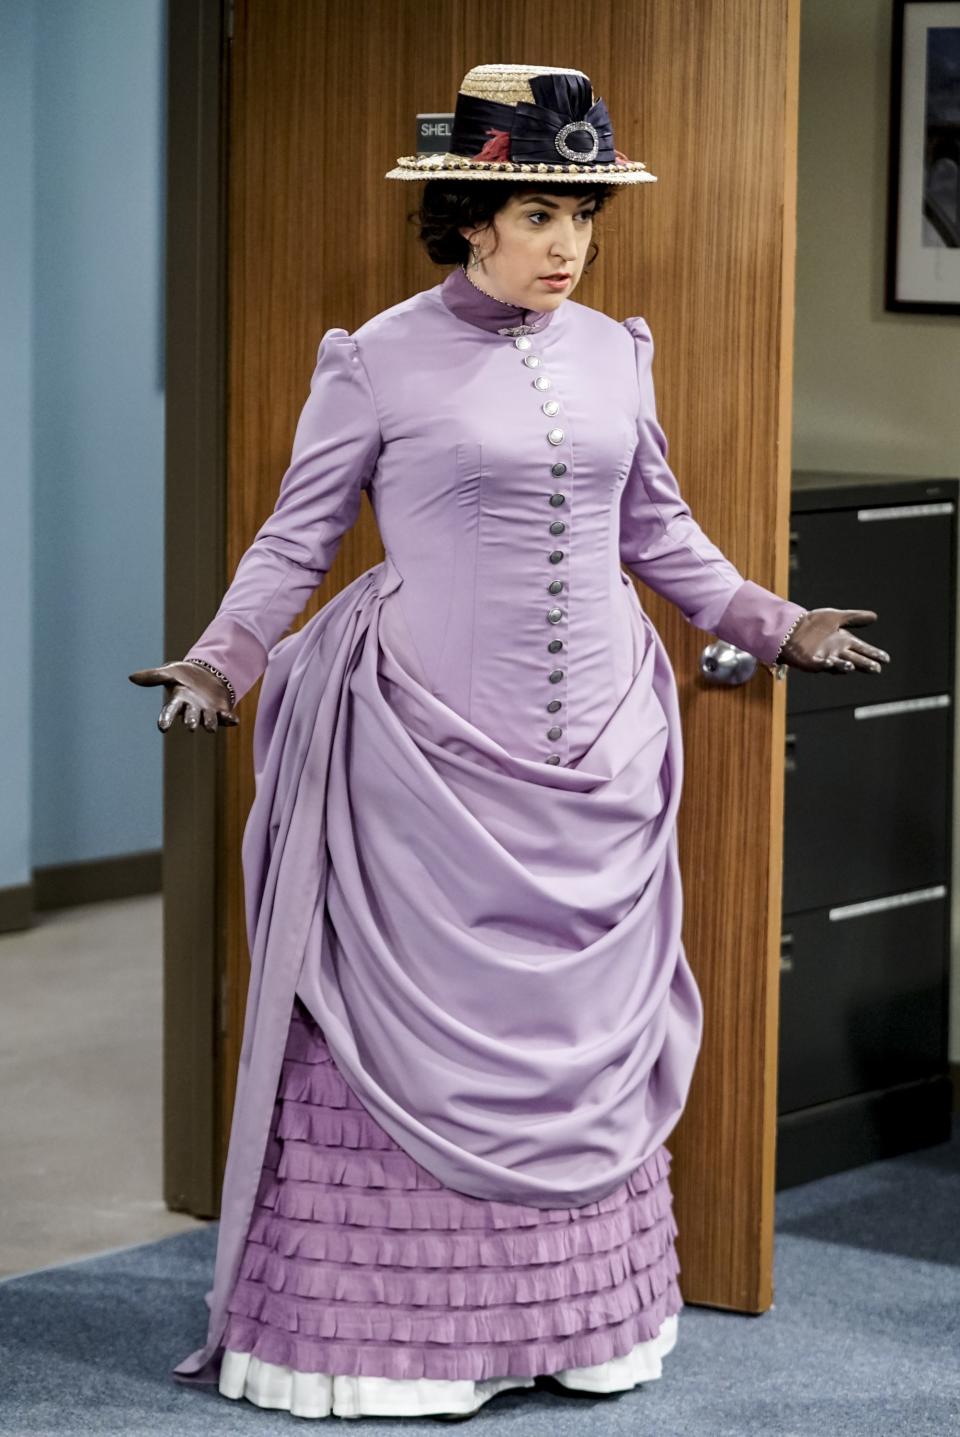 'The Big Bang Theory' executive producer Steve Holland explains those Halloween costumes in 'The Imitation Perturbation' and the inspiration behind the episode.